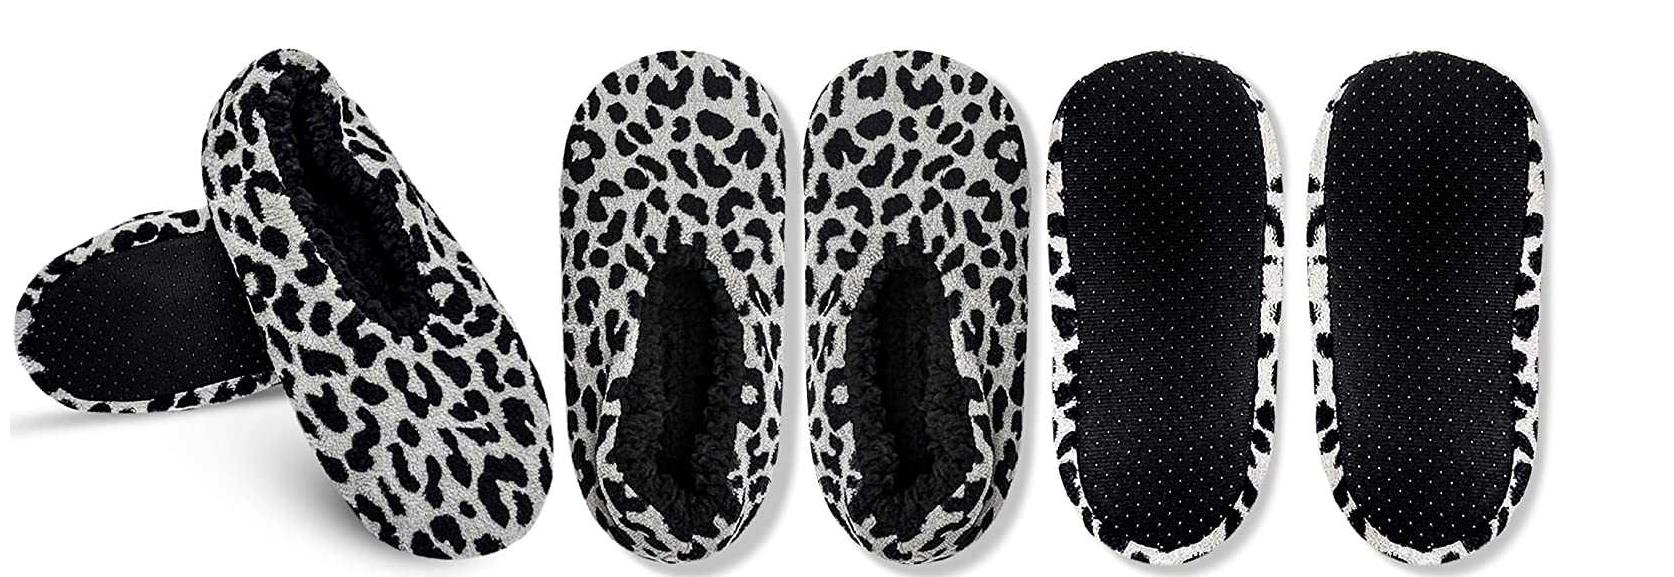 Isaac Mizrahi Leopard Sherpa Lined Slippers. 80023pairs. EXW Los Angeles 